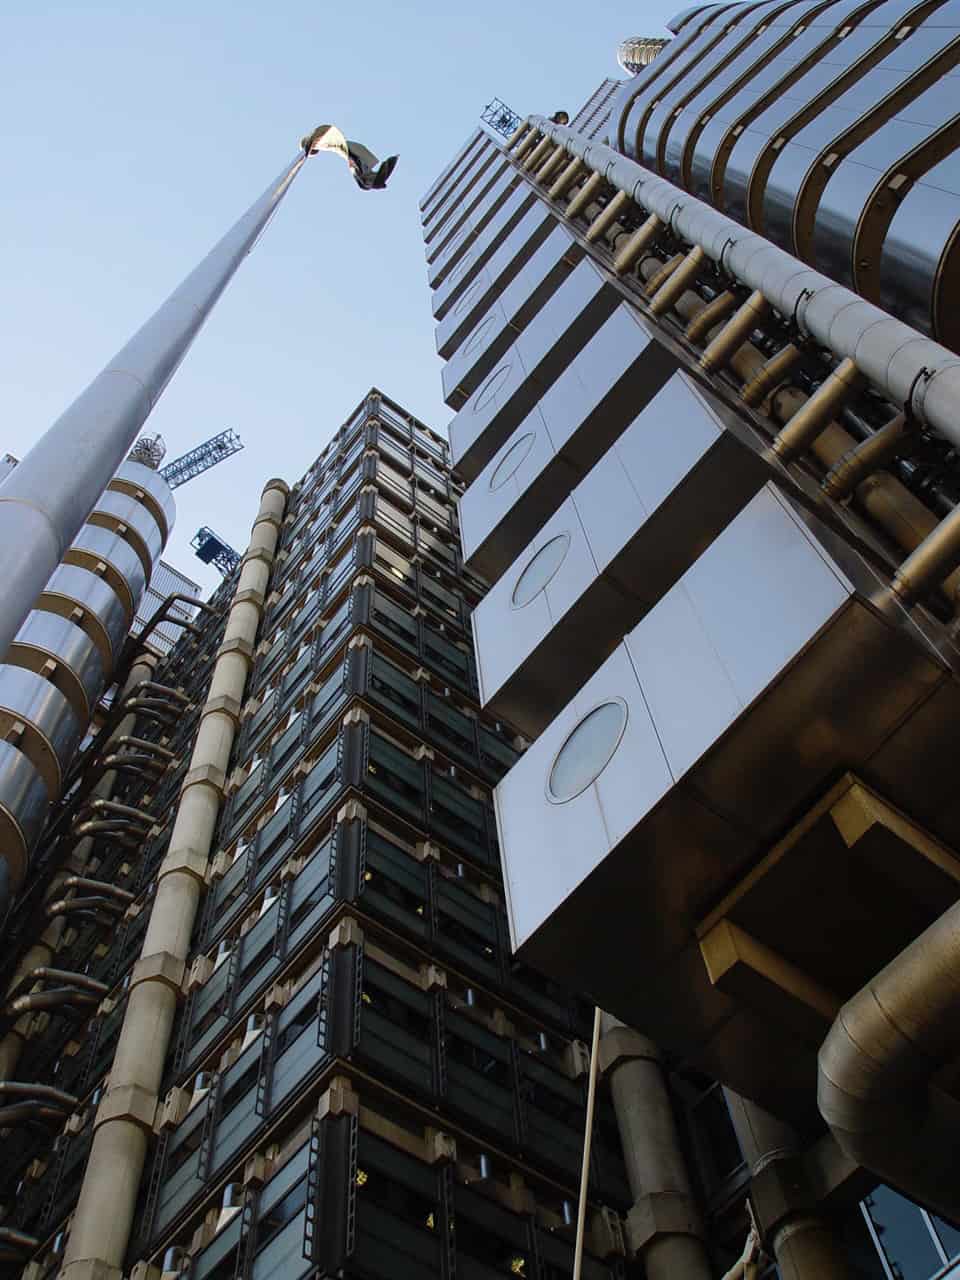 Lloyd's Building in the City of London, England